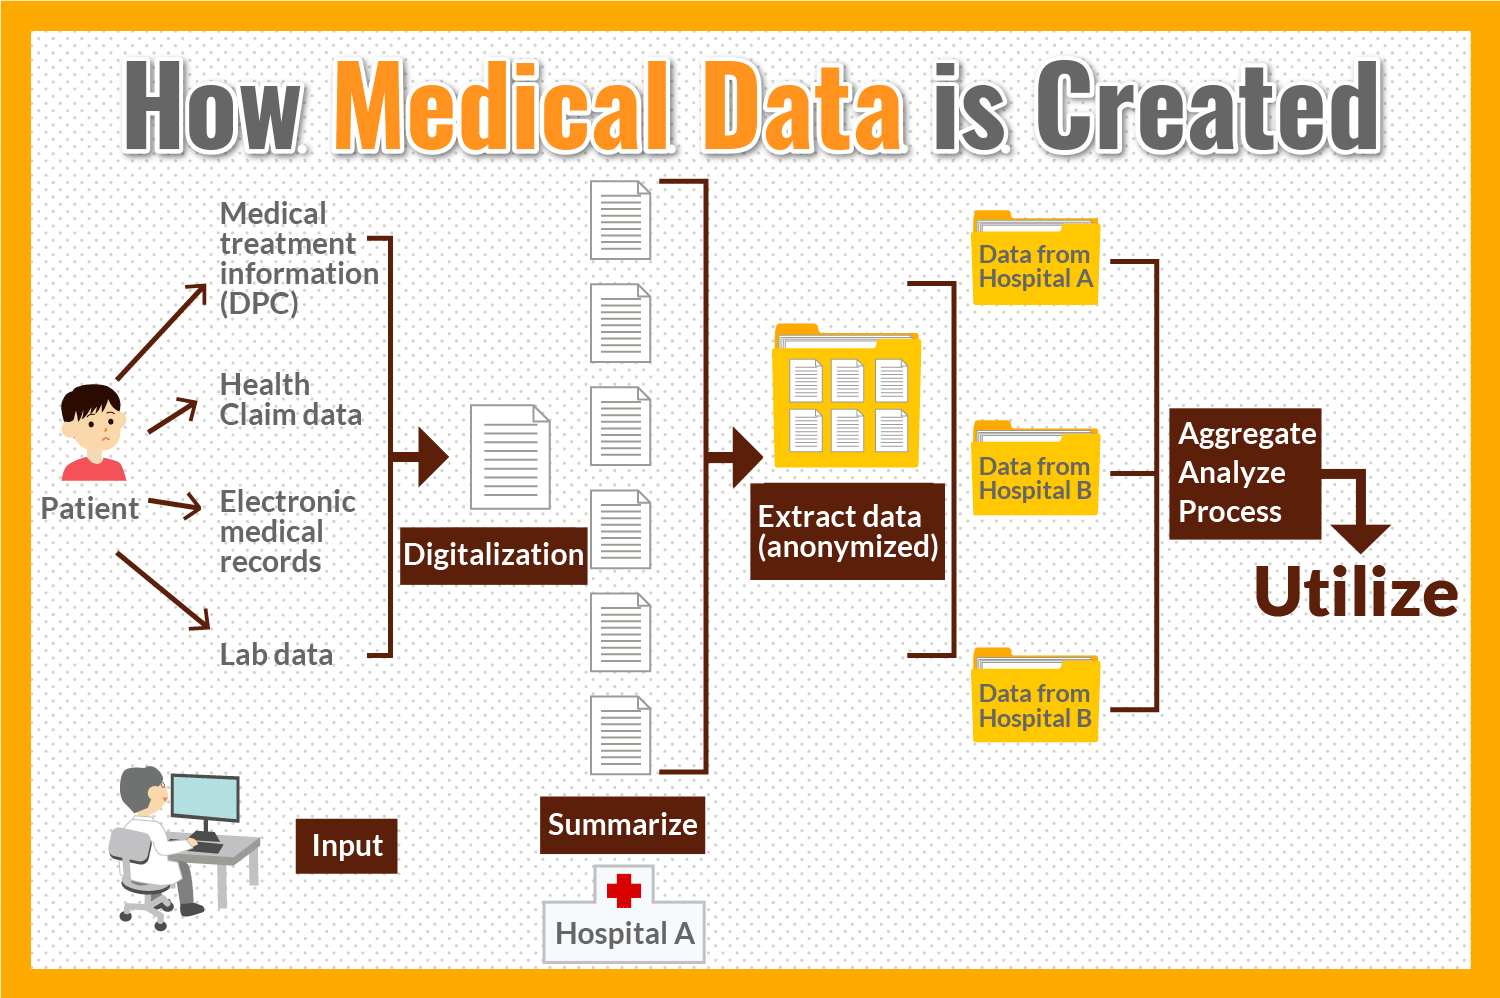 How Medical Data is Created